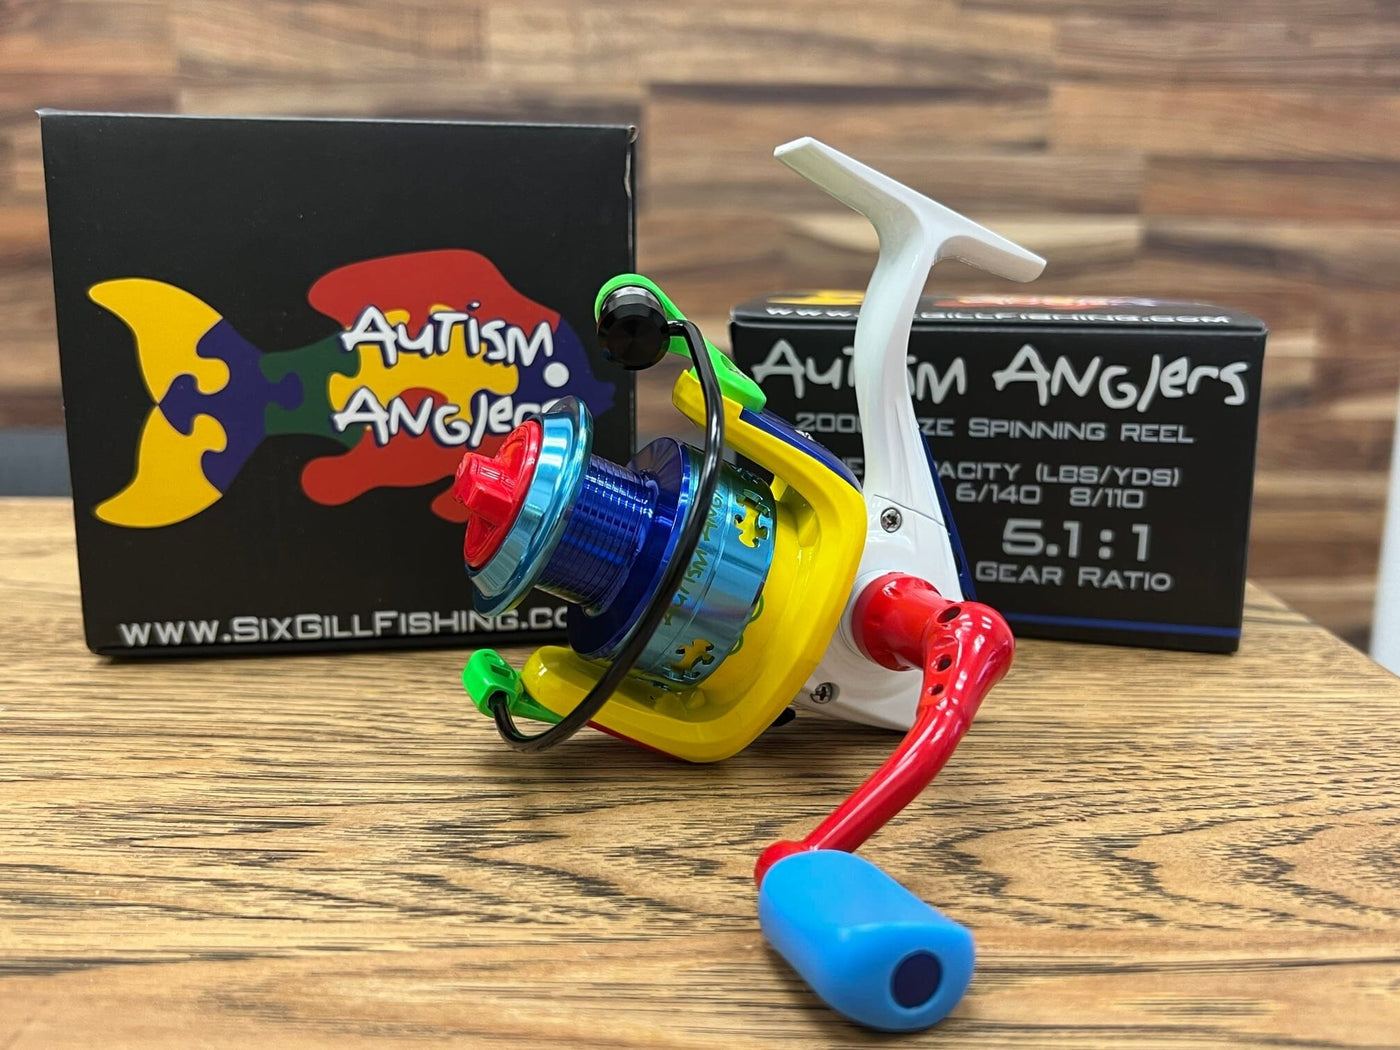 Autism awareness bait caster  Shoutout to Sixgill Fishing